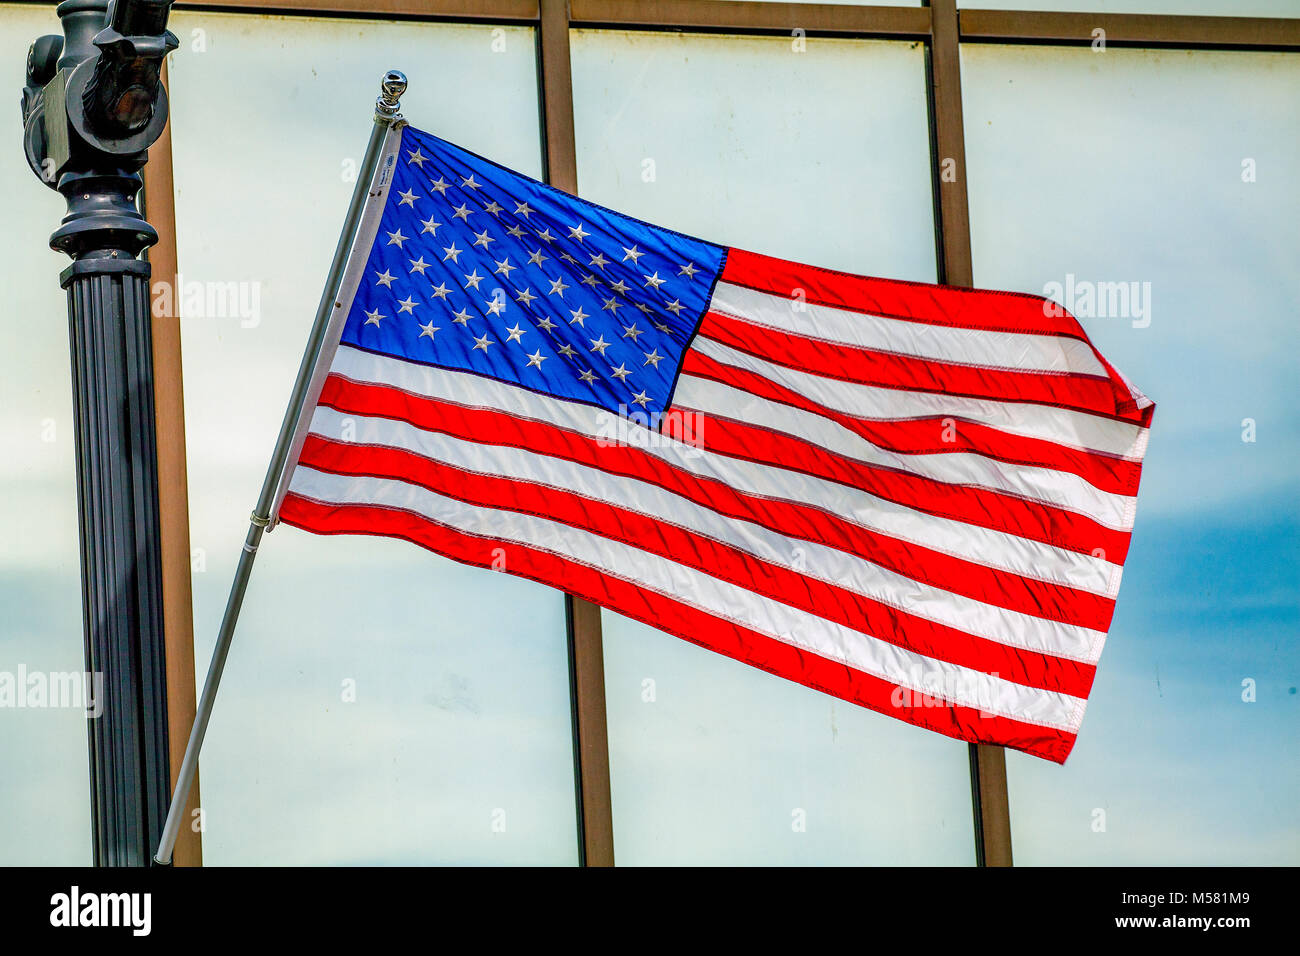 A bright, colorful American flag attached to a black, iron pole waves in the breeze outside a bank window in Littleton, NH, USA. Stock Photo